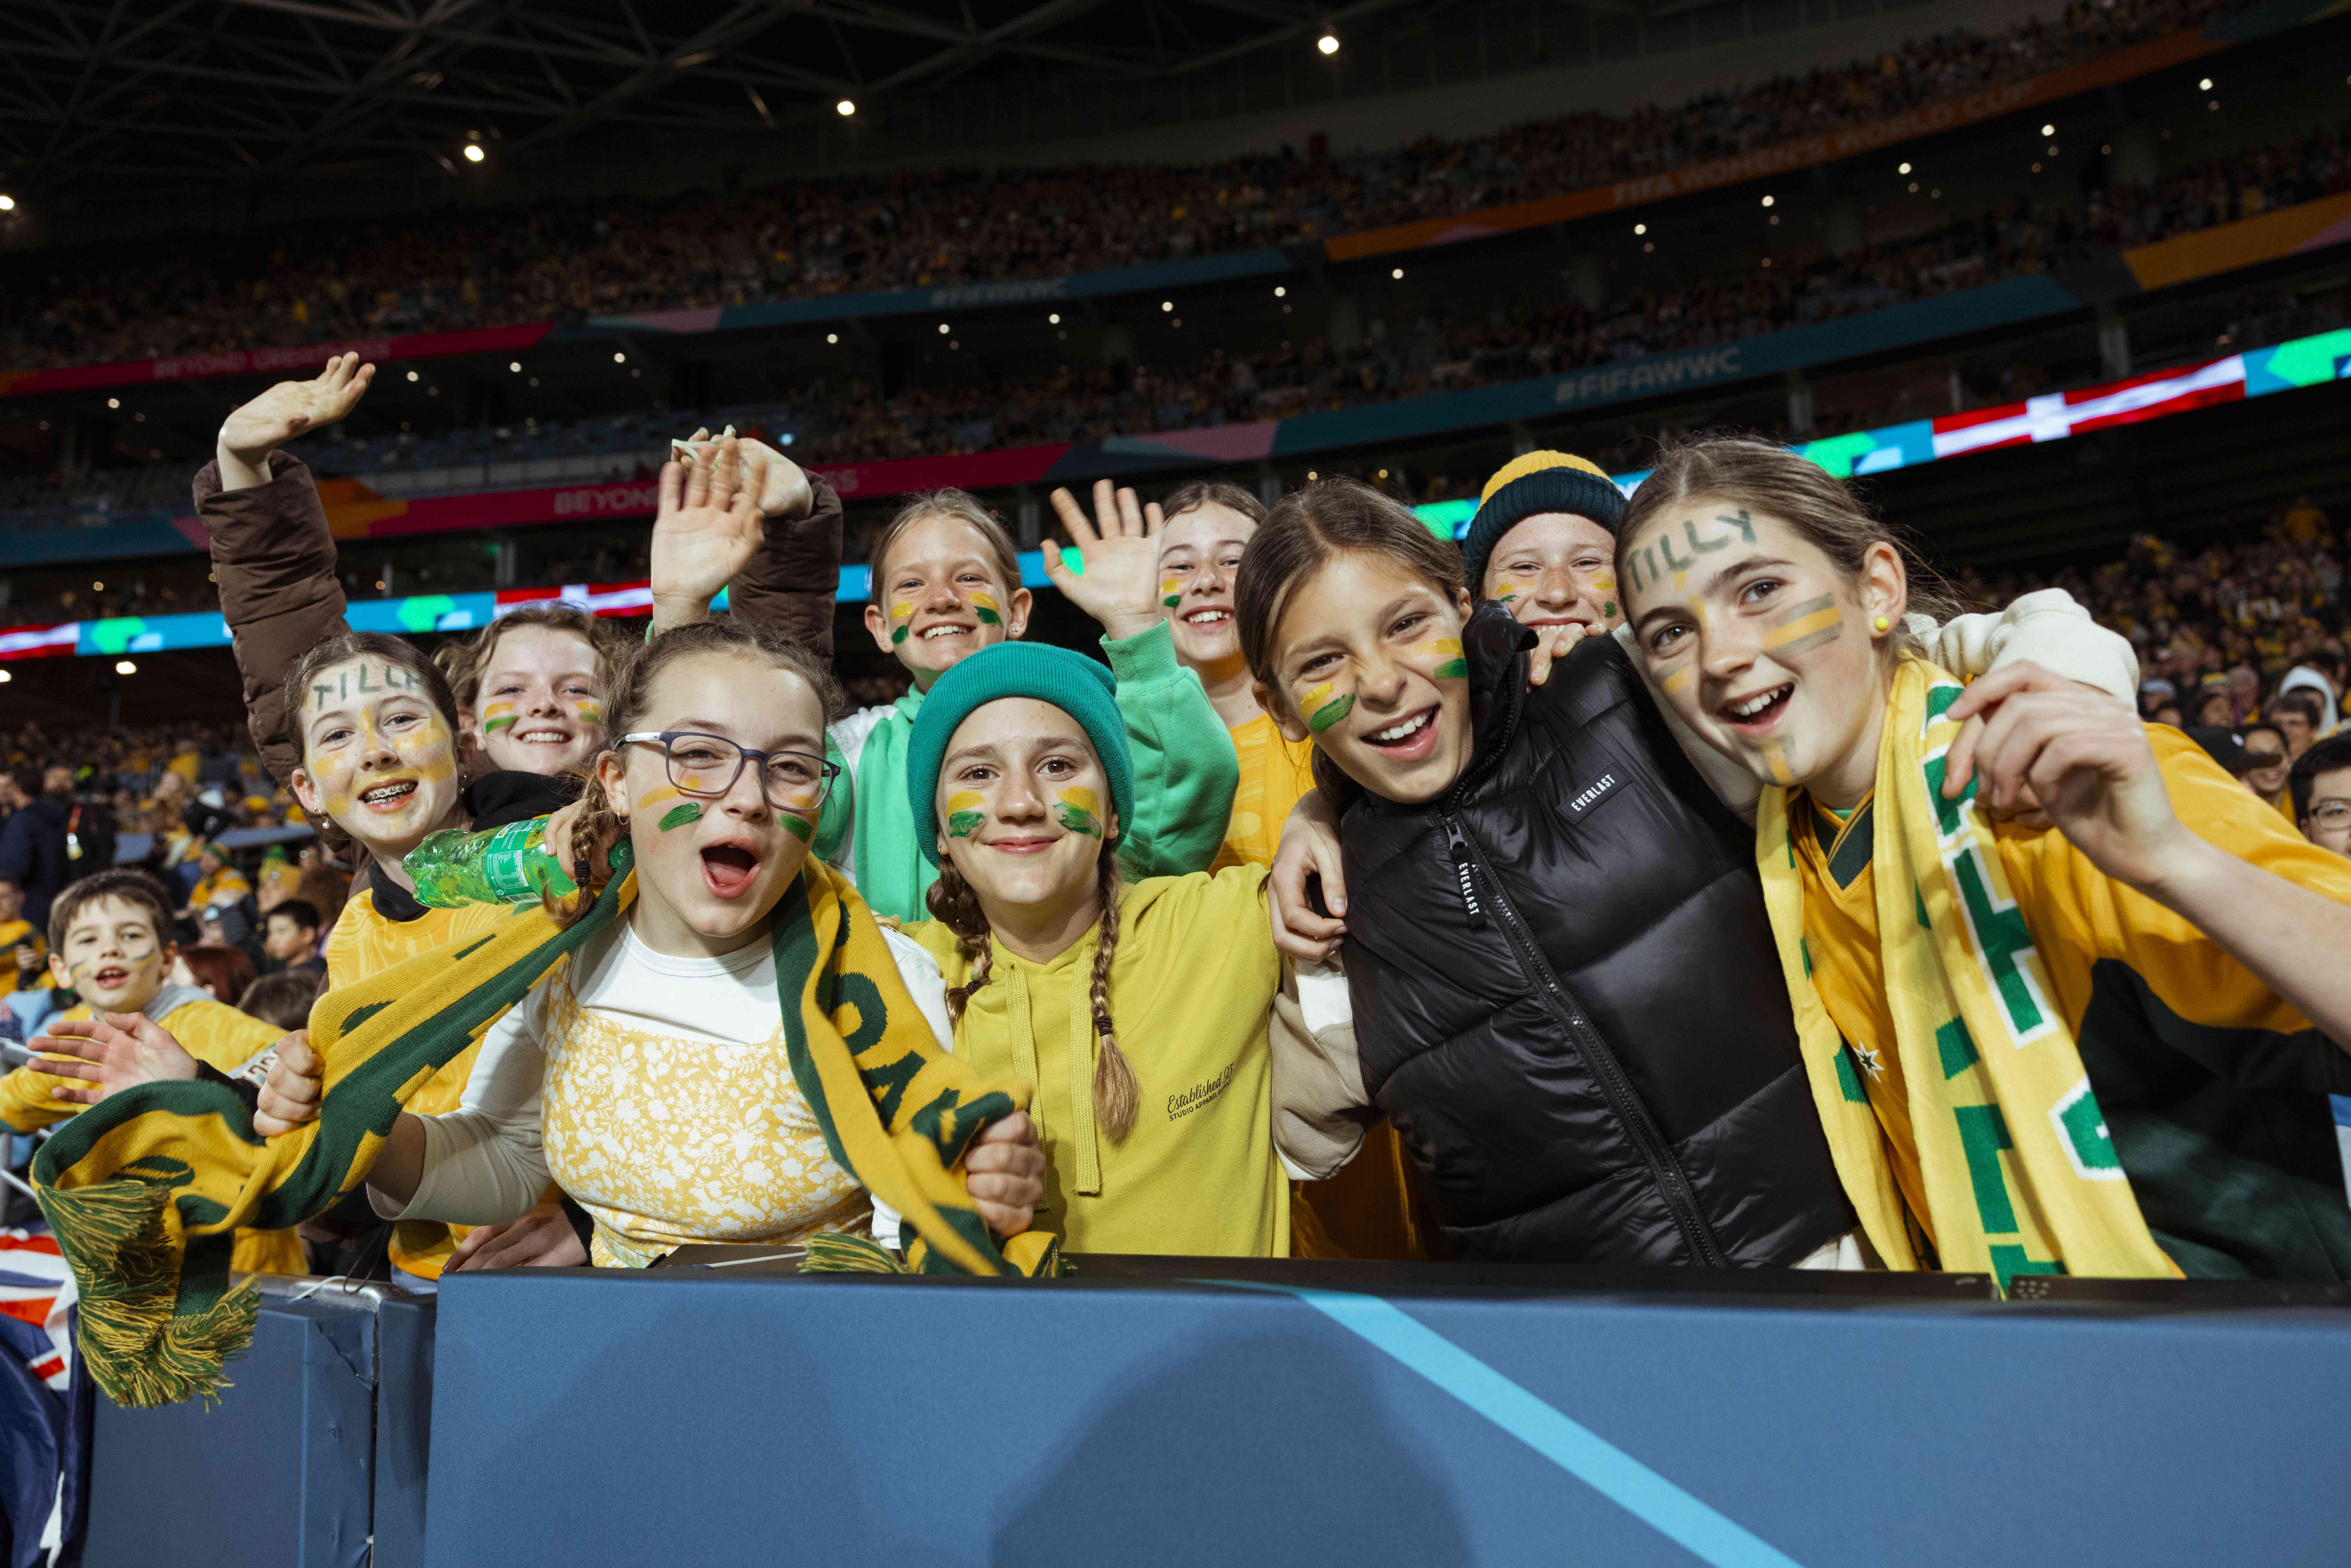 Matildas fans excited as they await kick off - Tiffany Williams